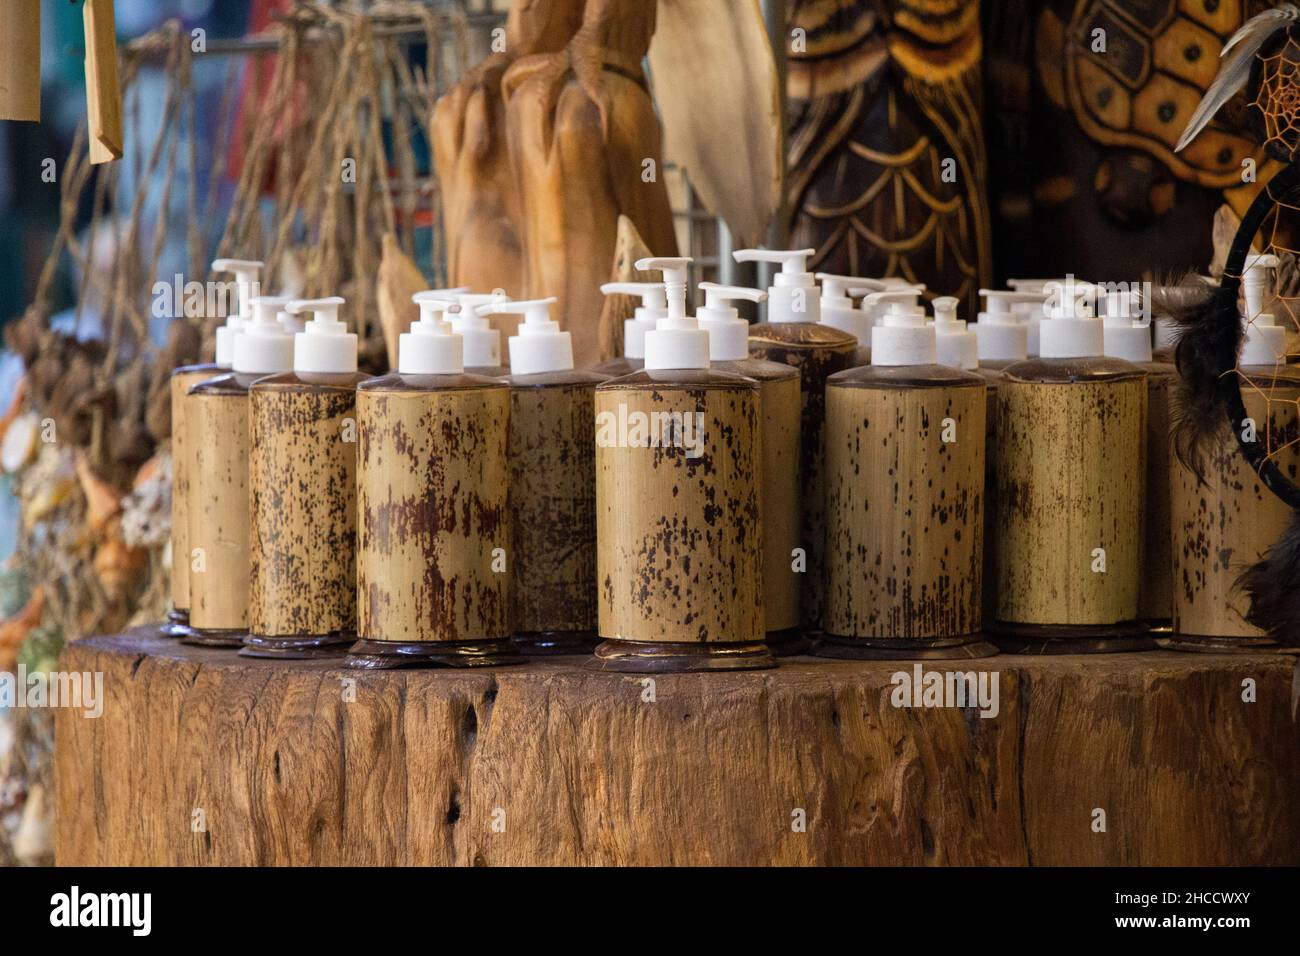 Closeup shot of soap dispensers on a trunk Stock Photo